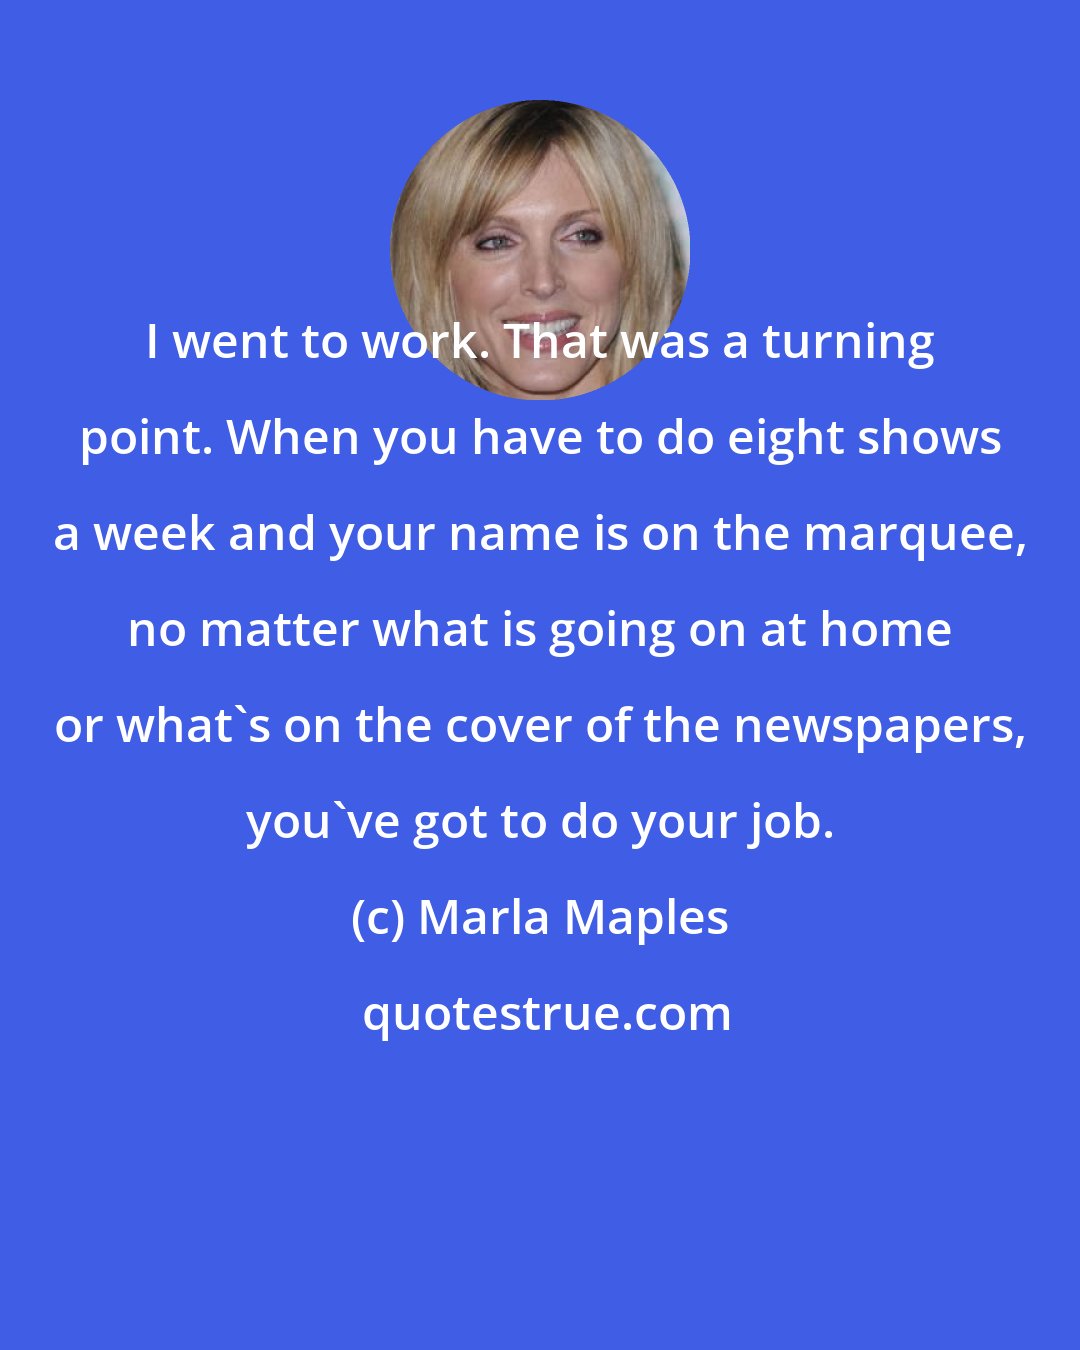 Marla Maples: I went to work. That was a turning point. When you have to do eight shows a week and your name is on the marquee, no matter what is going on at home or what's on the cover of the newspapers, you've got to do your job.